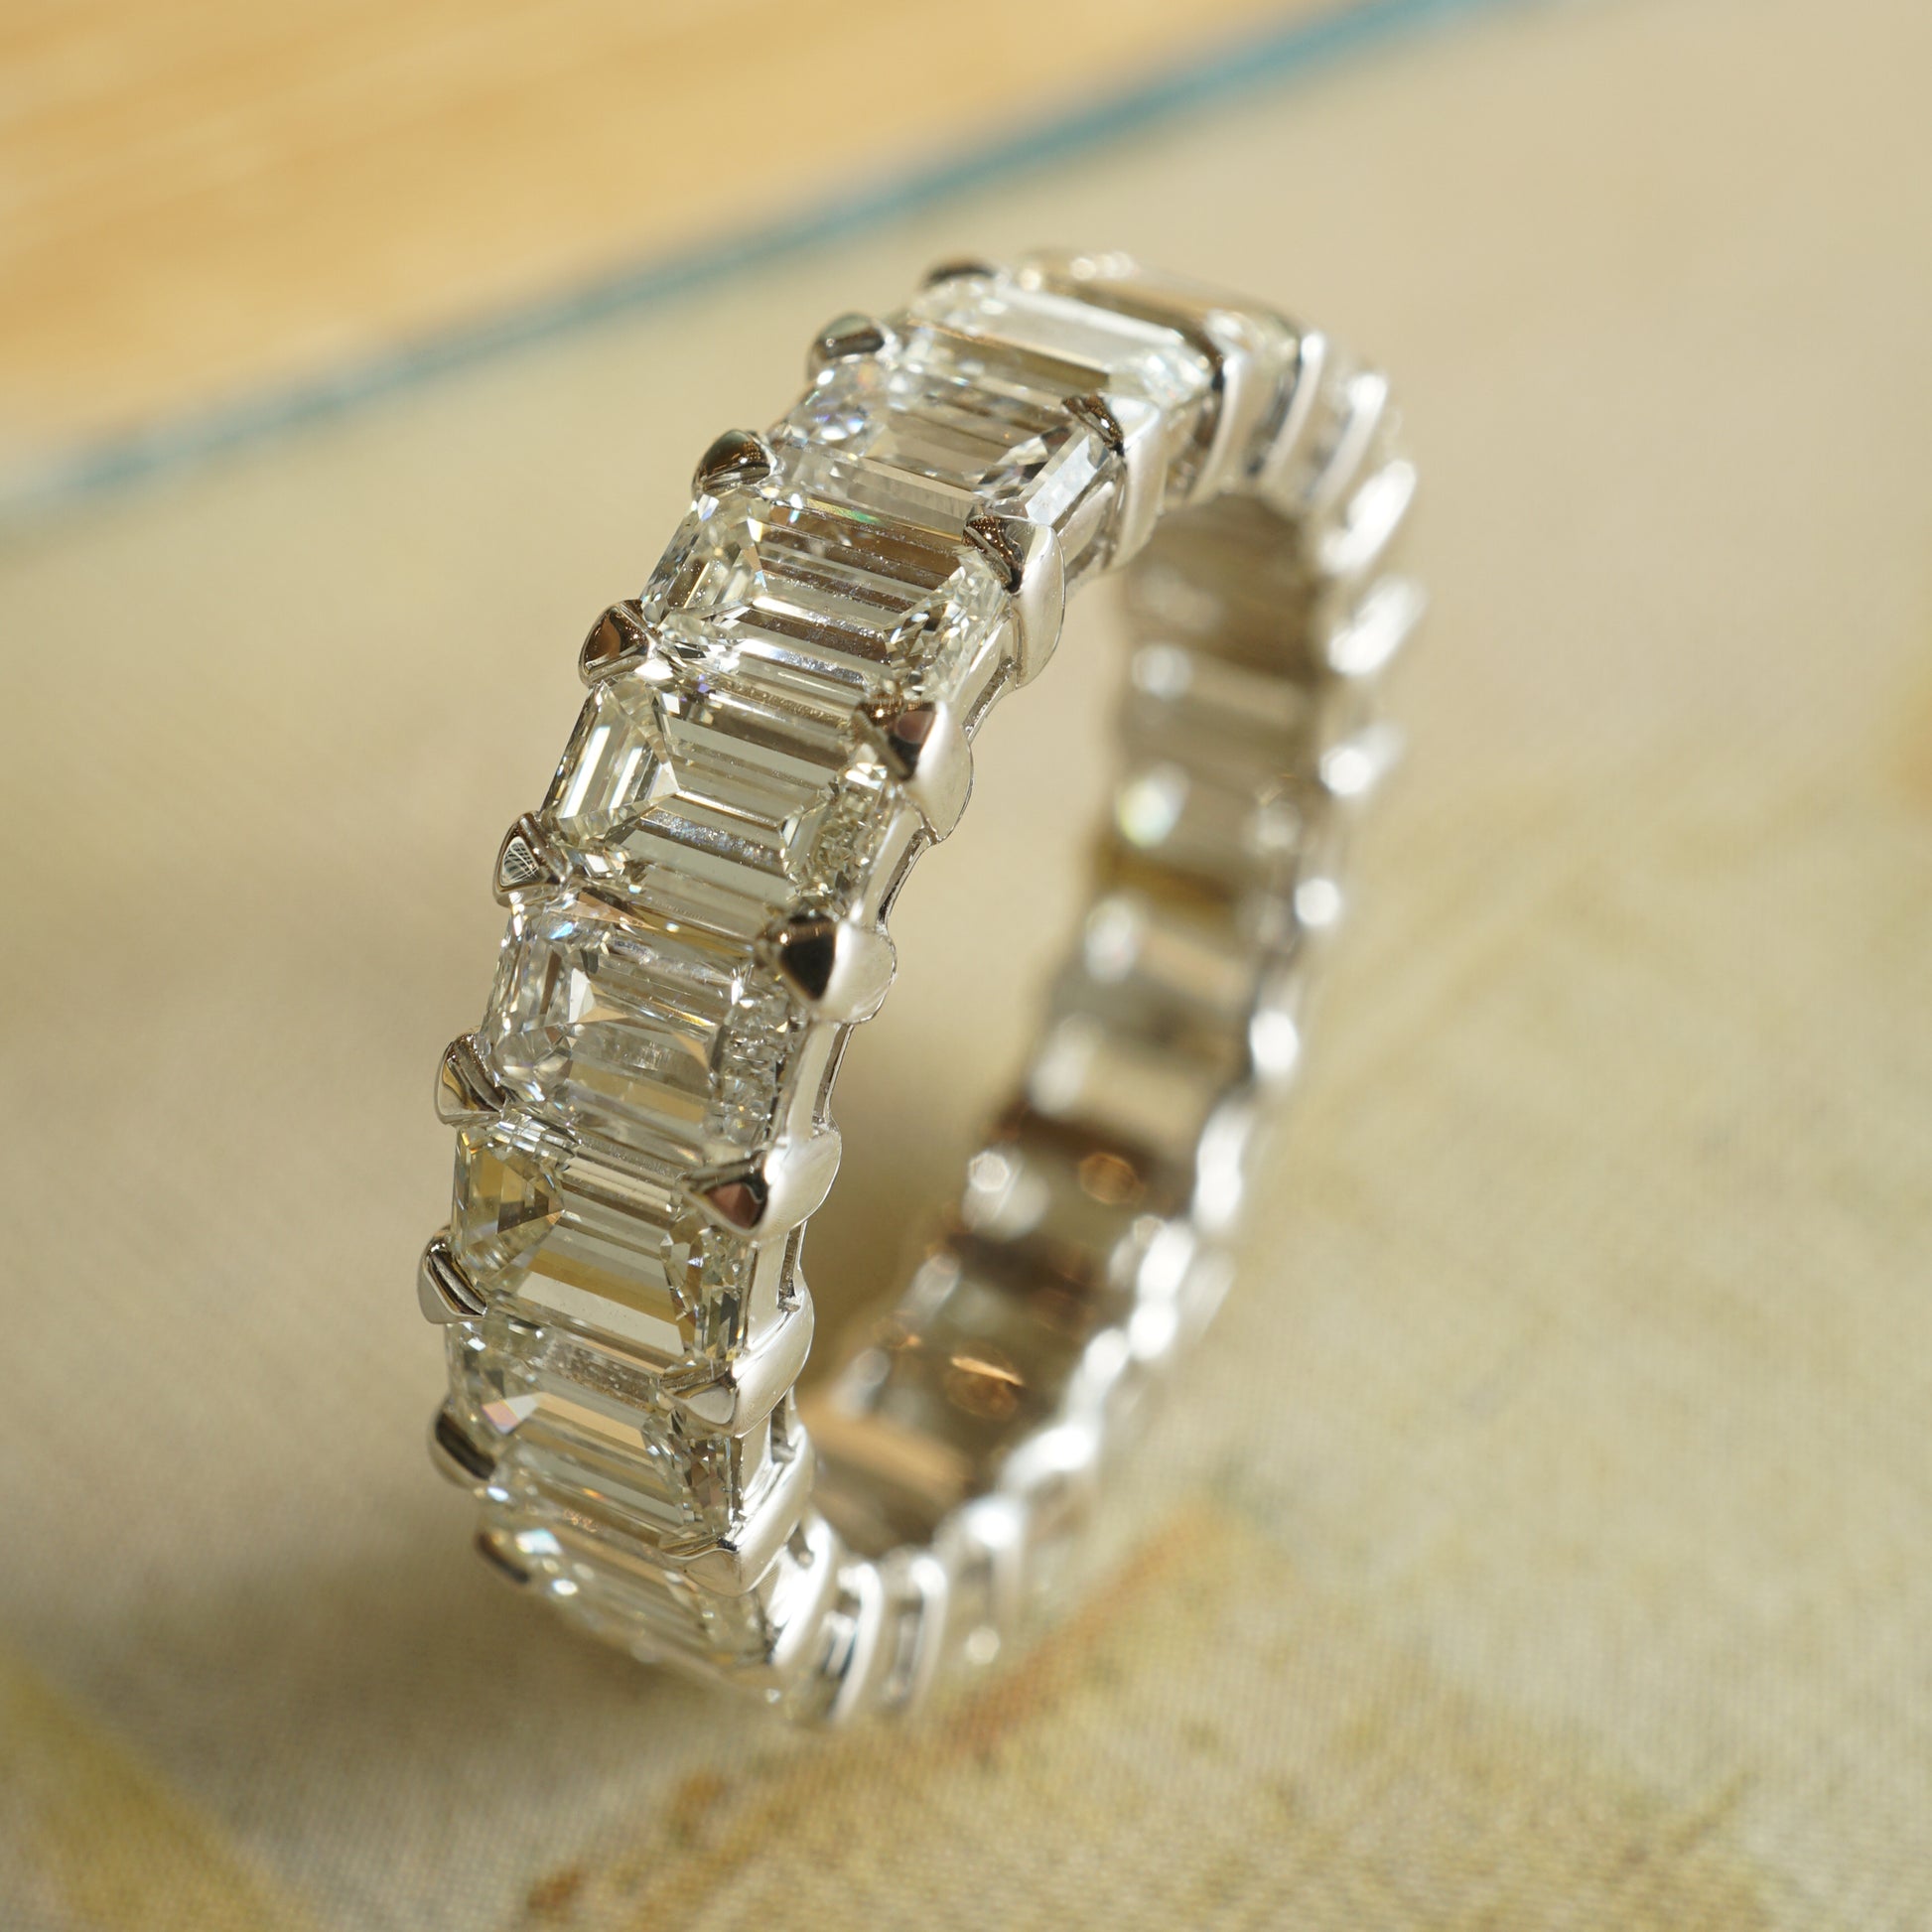 6.07 Baguette Cut Diamond Eternity Band in 18k White GoldComposition: 18 Karat White GoldRing Size: 6.5Total Diamond Weight: 6.07 ctTotal Gram Weight: 4.3 g